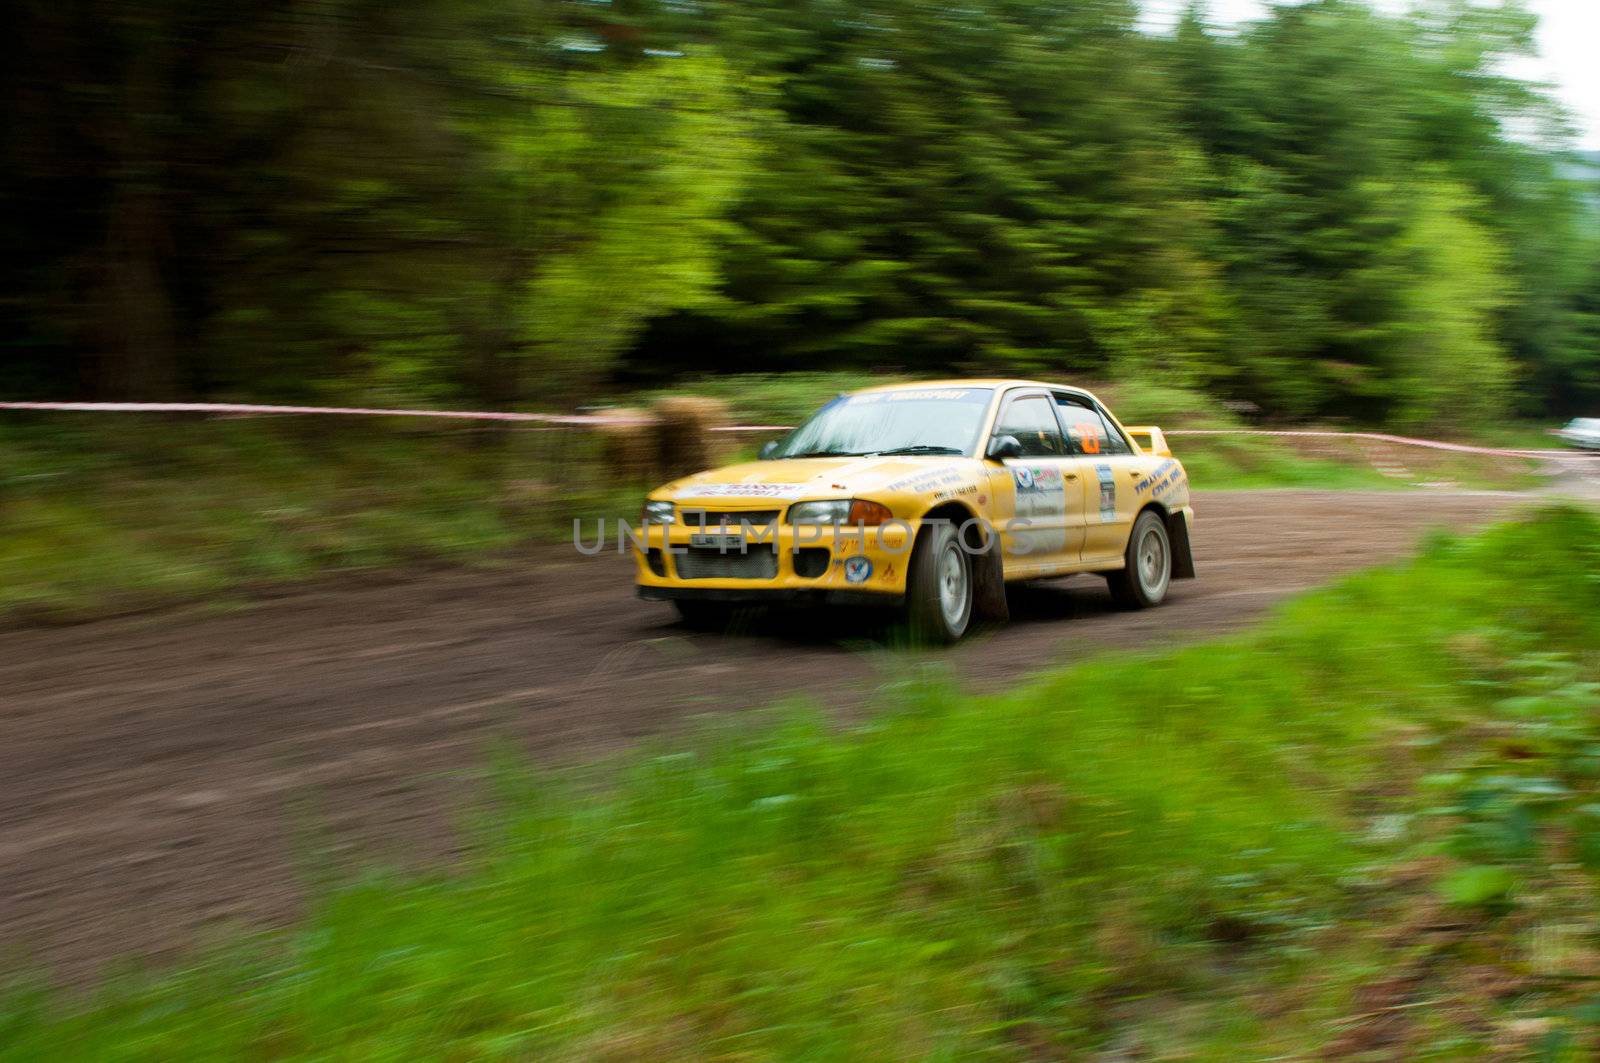 MALLOW, IRELAND - MAY 19: M. O' Connor driving Mitsubishi Evo at the Jim Walsh Cork Forest Rally on May 19, 2012 in Mallow, Ireland. 4th round of the Valvoline National Forest Rally Championship.